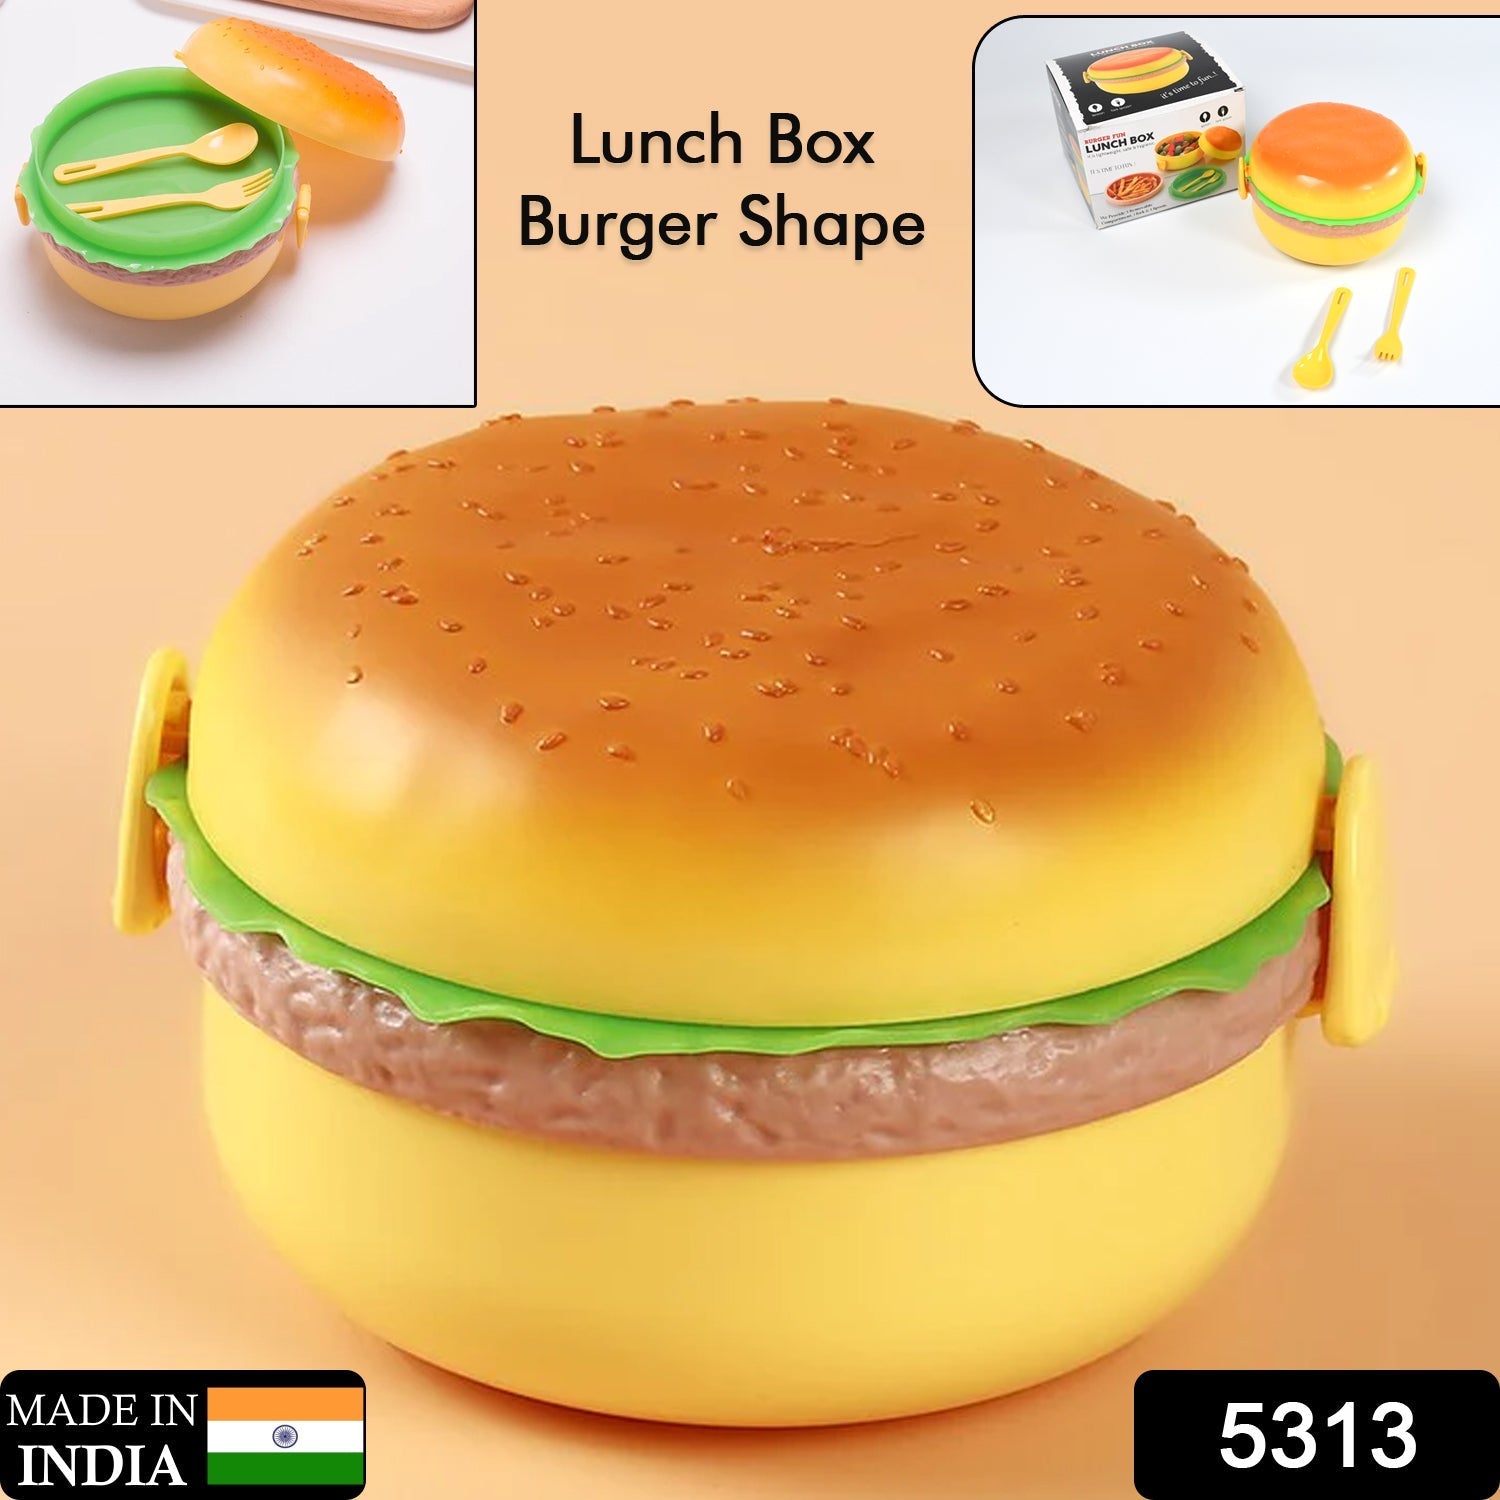 5313 Burger Shape Lunch Box Plastic Lunch Box Food Container Sets Double Layer Lunchbox 1000ml With 2 Spoon Applicable to Kids and Elementary School Students DeoDap